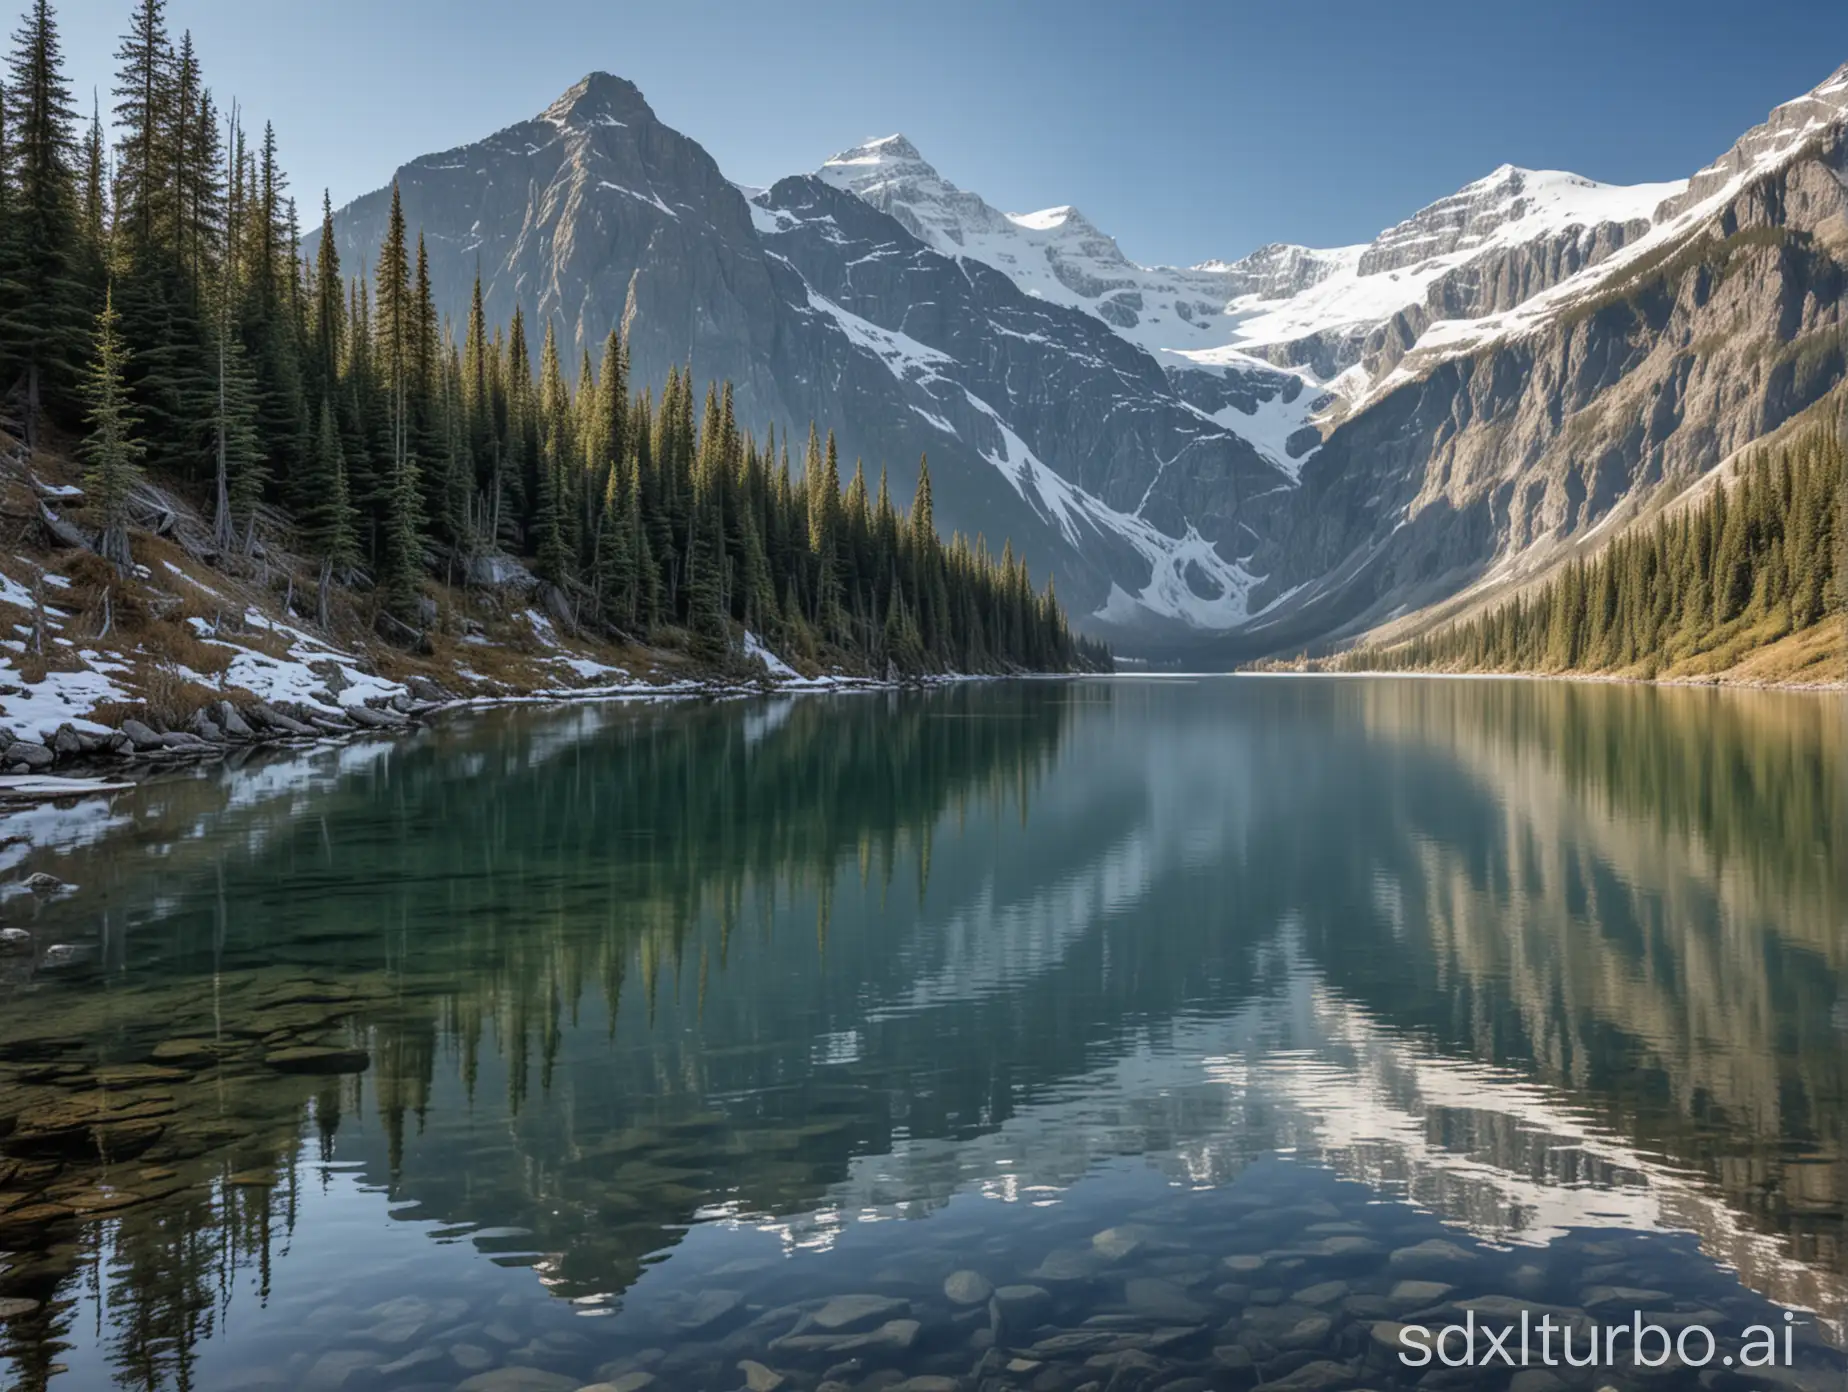 Canada's natural geography and scenery, true landscape, snow-capped mountains, clear weather, lake at the foot of the mountain